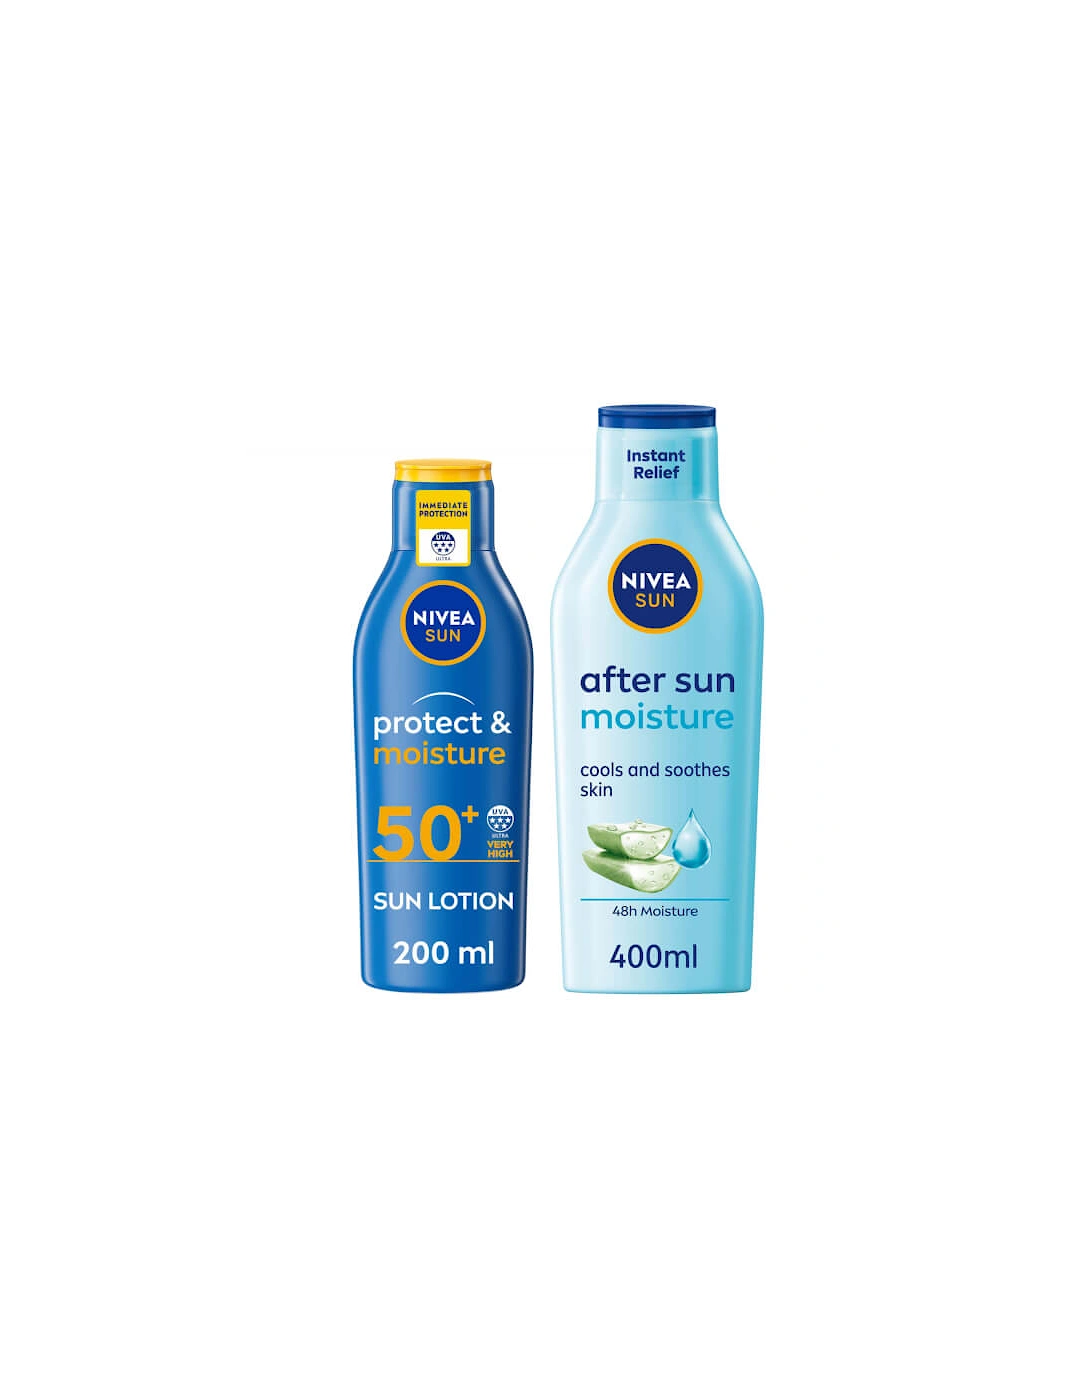 Protect and Moisture Sun Cream and Aftersun Duo, 2 of 1